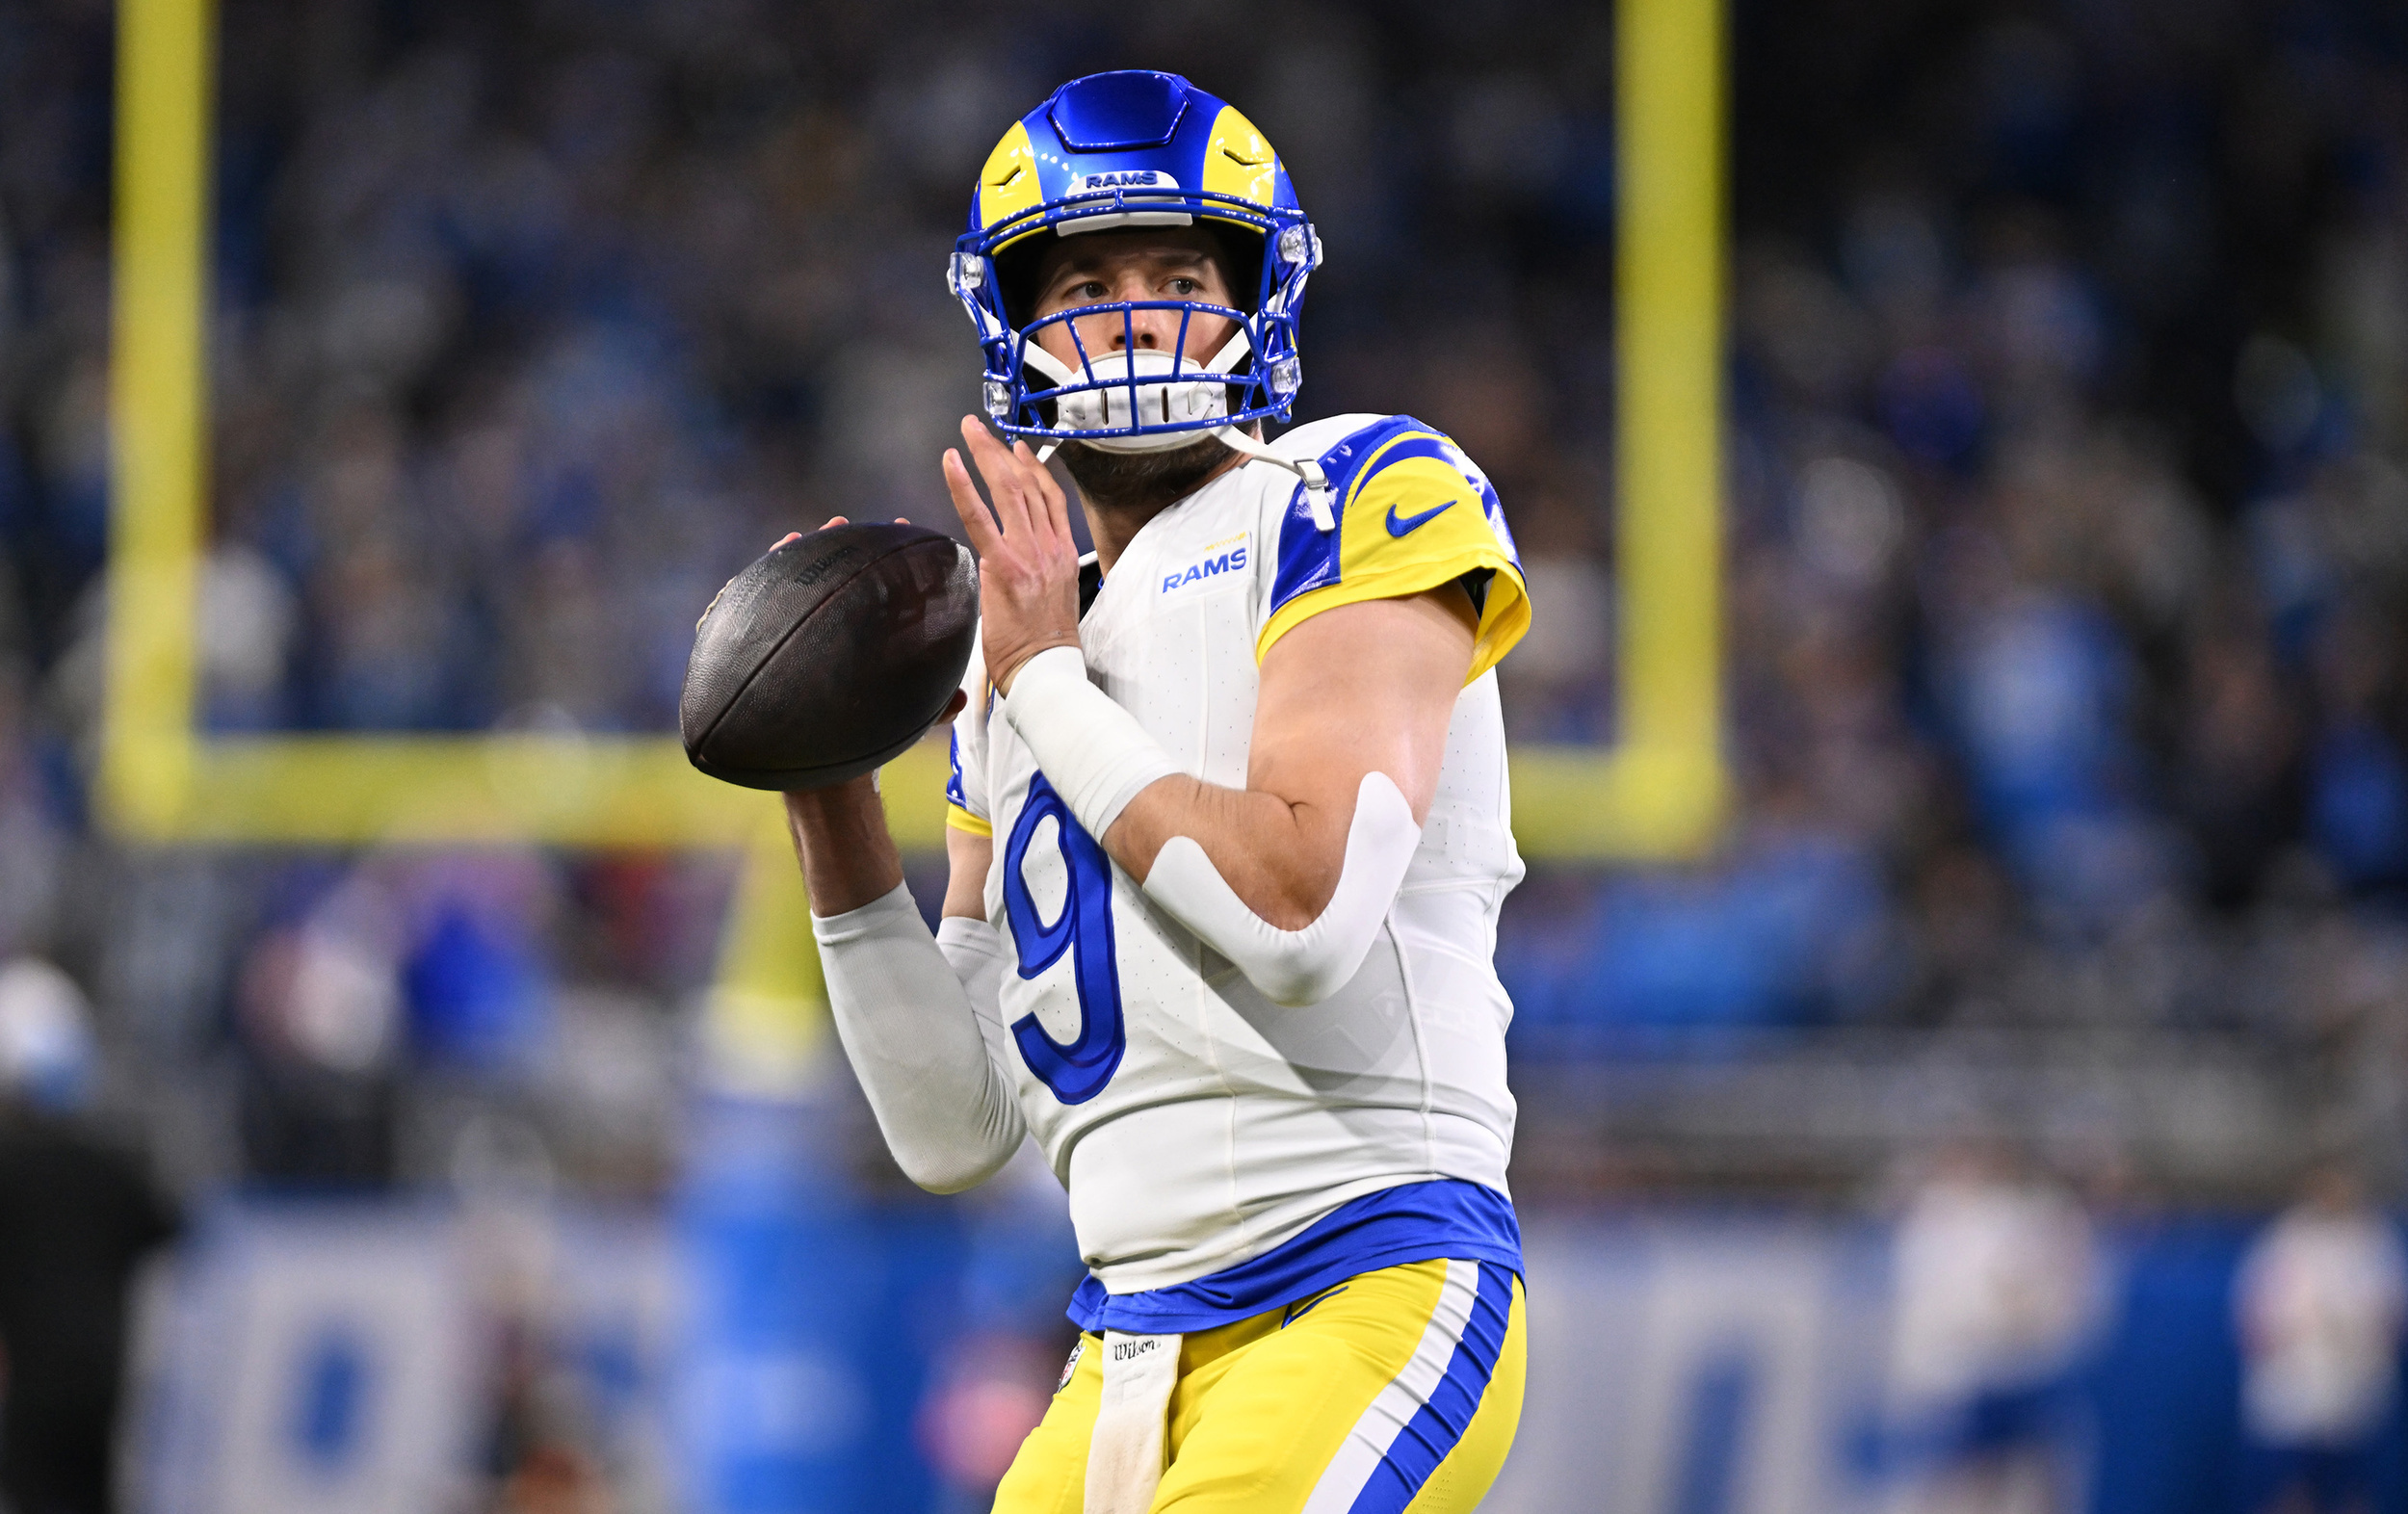 rams' matthew stafford reacts to hearing boos from lions fans